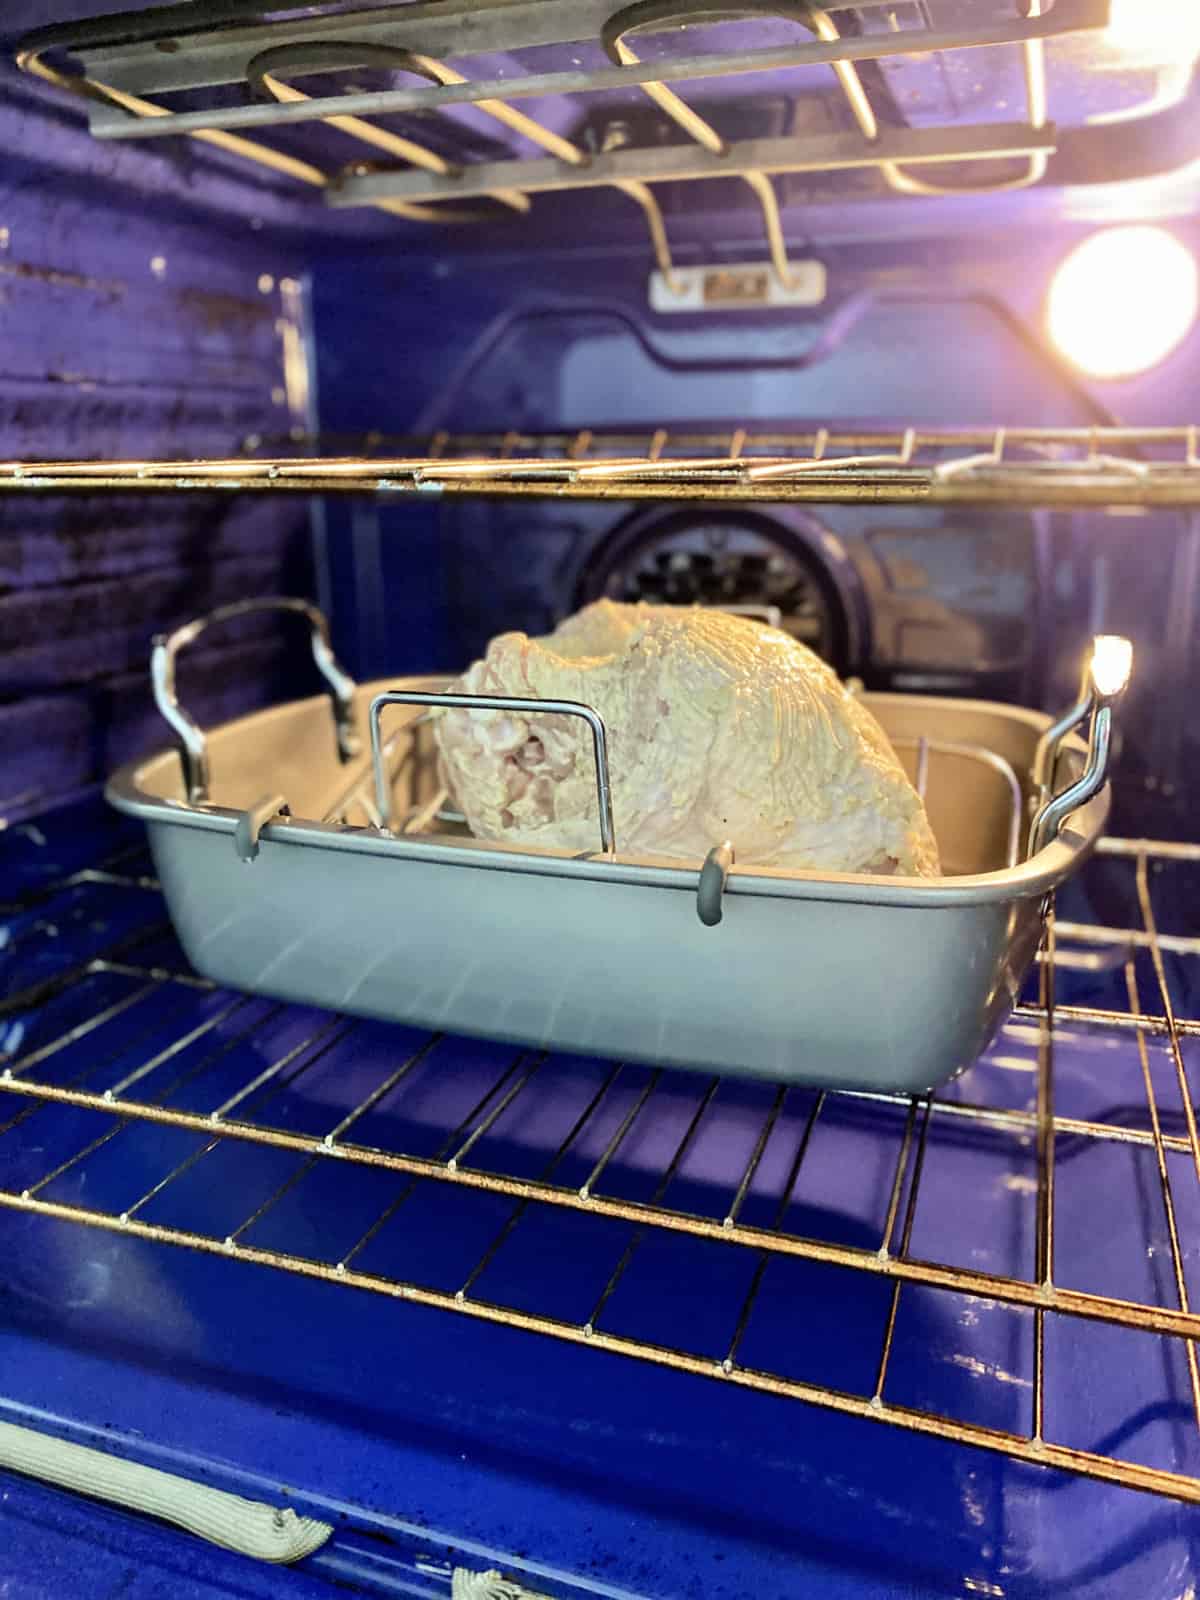 Raw chicken breast in a roasting rack inside a blue oven.